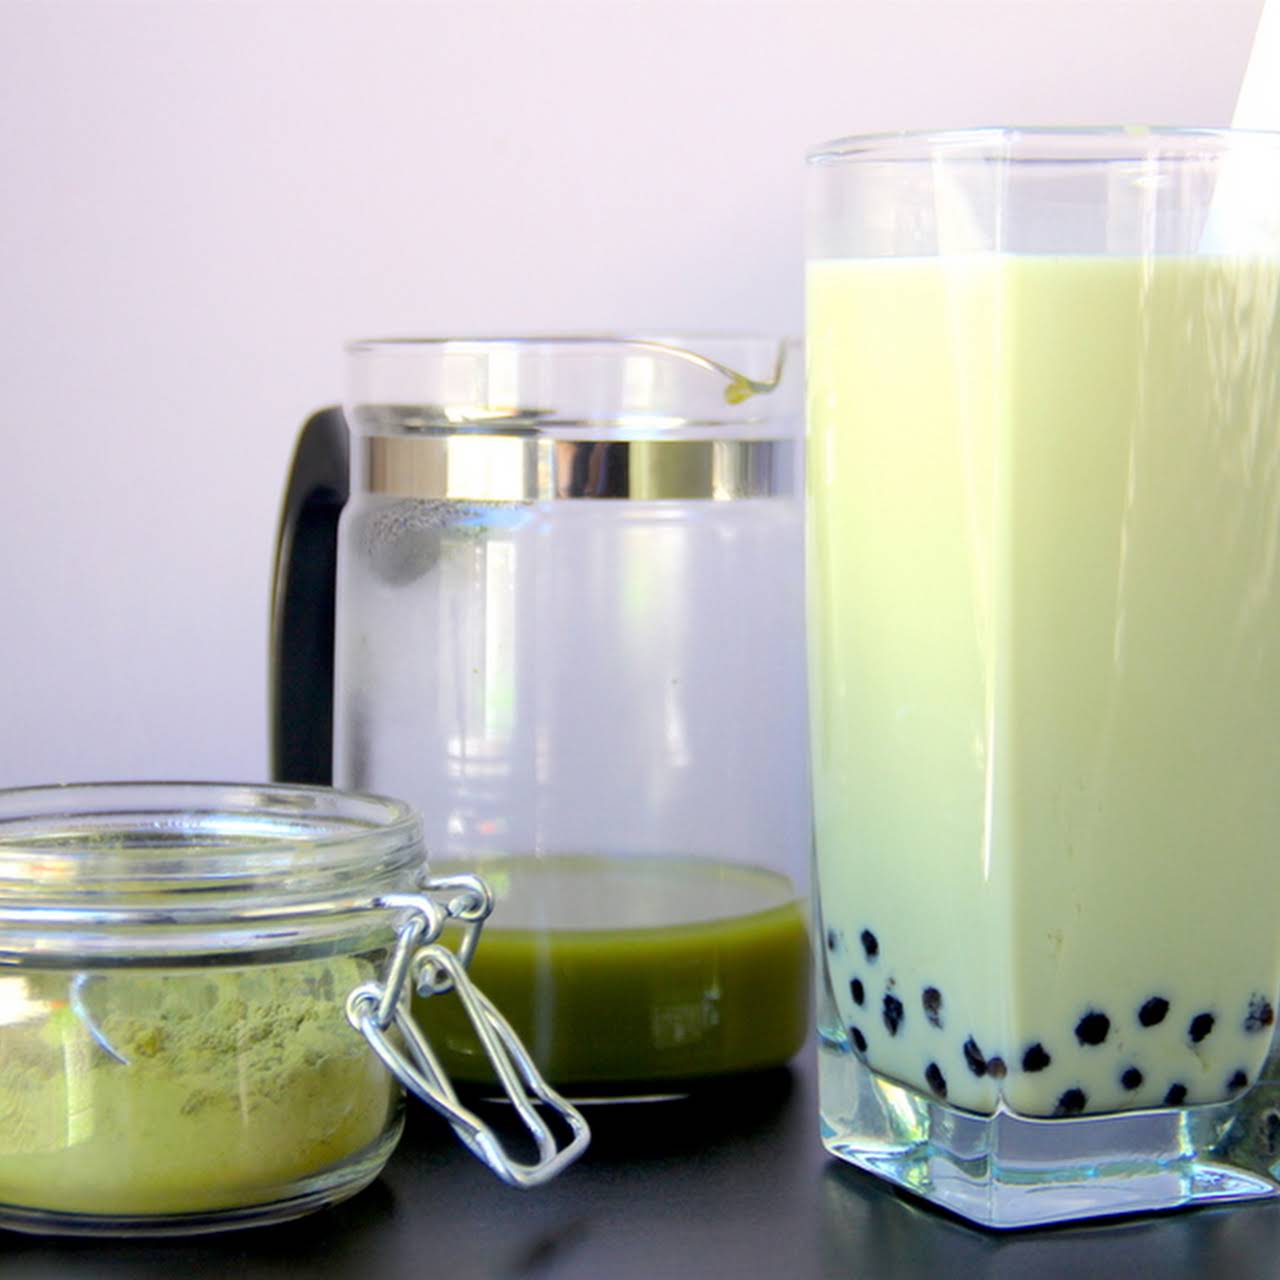 Bubble Tea Recipe - The Forked Spoon